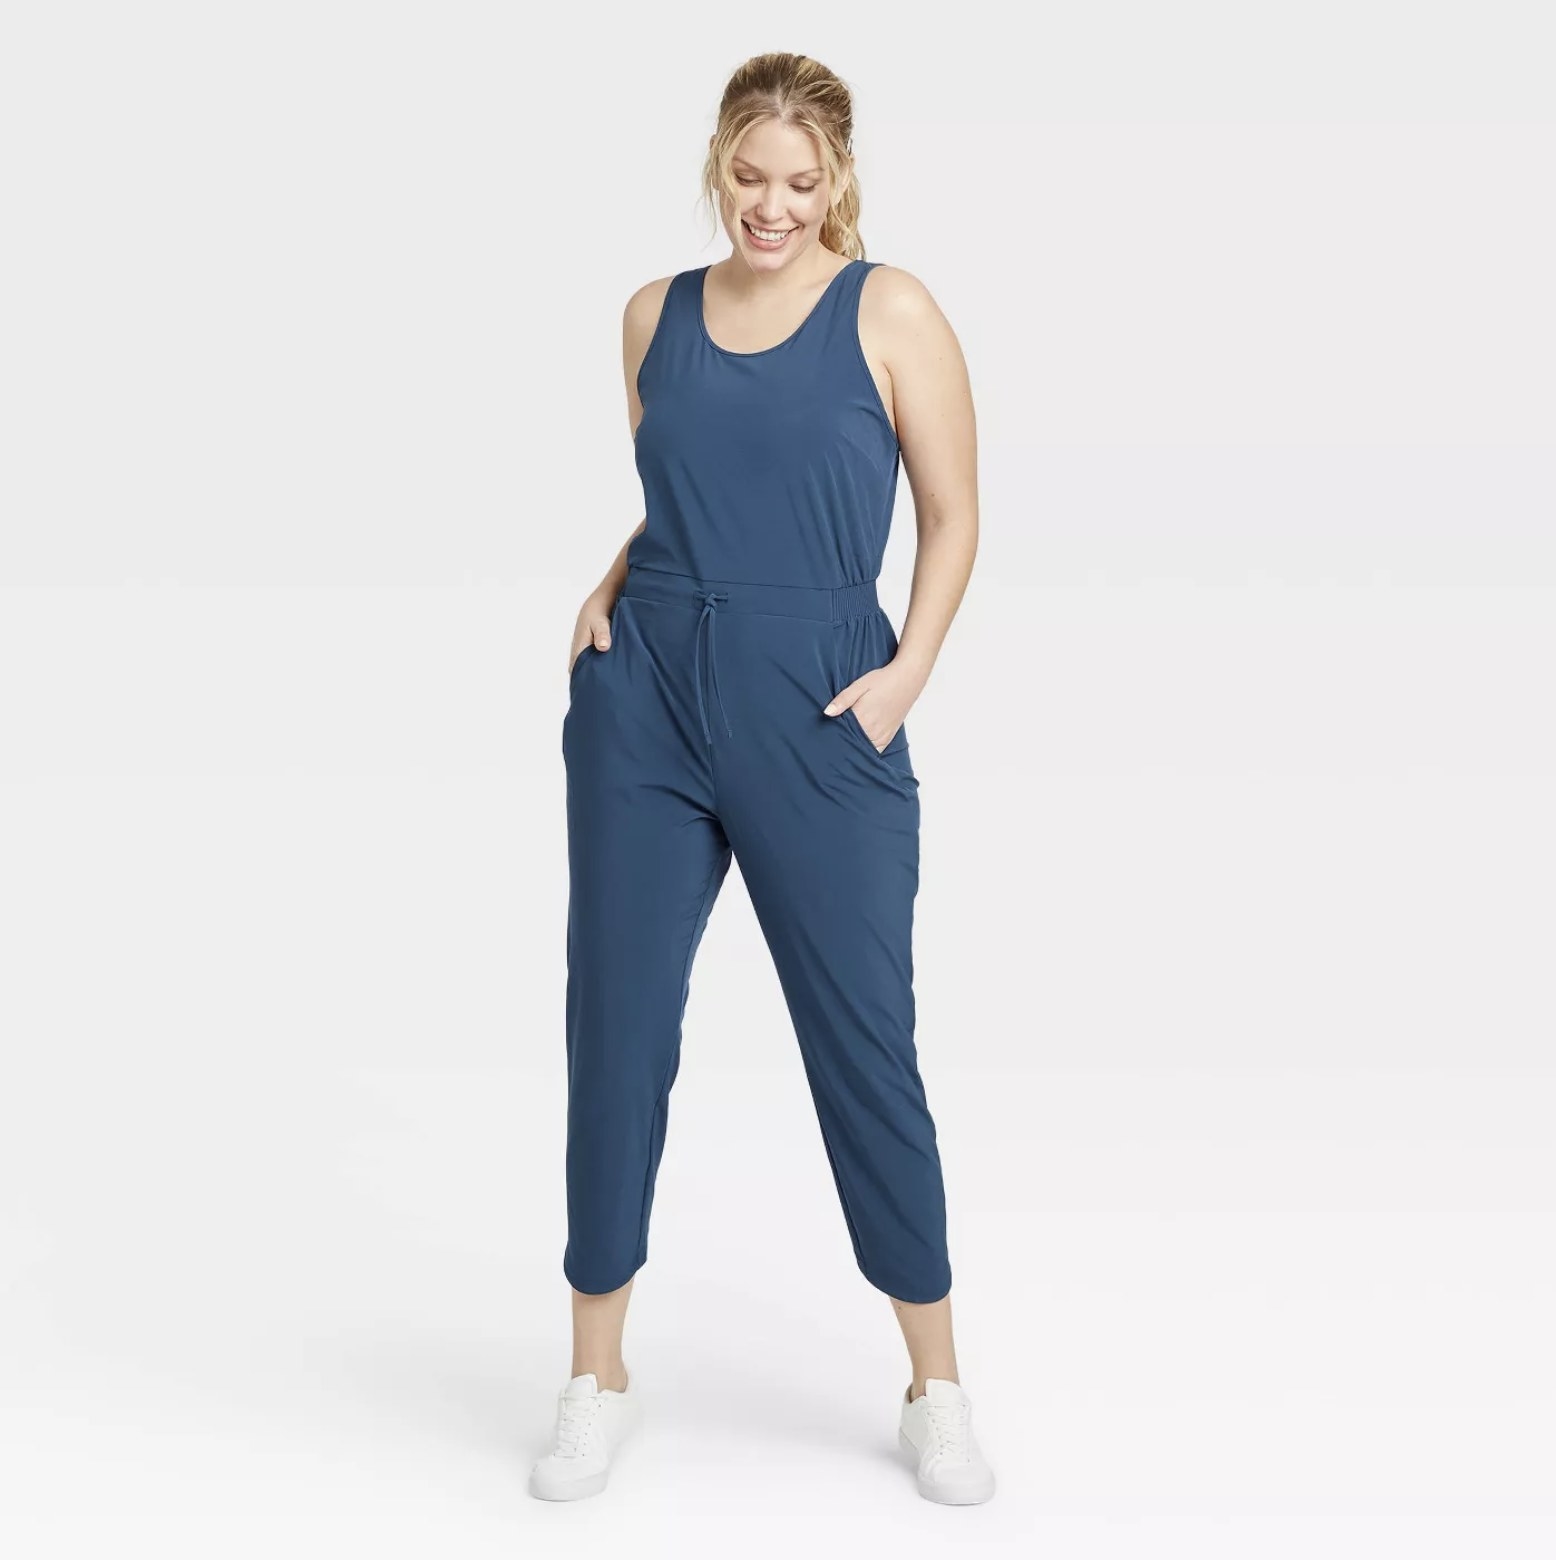 Model wears light blue stretchy woven jumpsuit with white sneakers